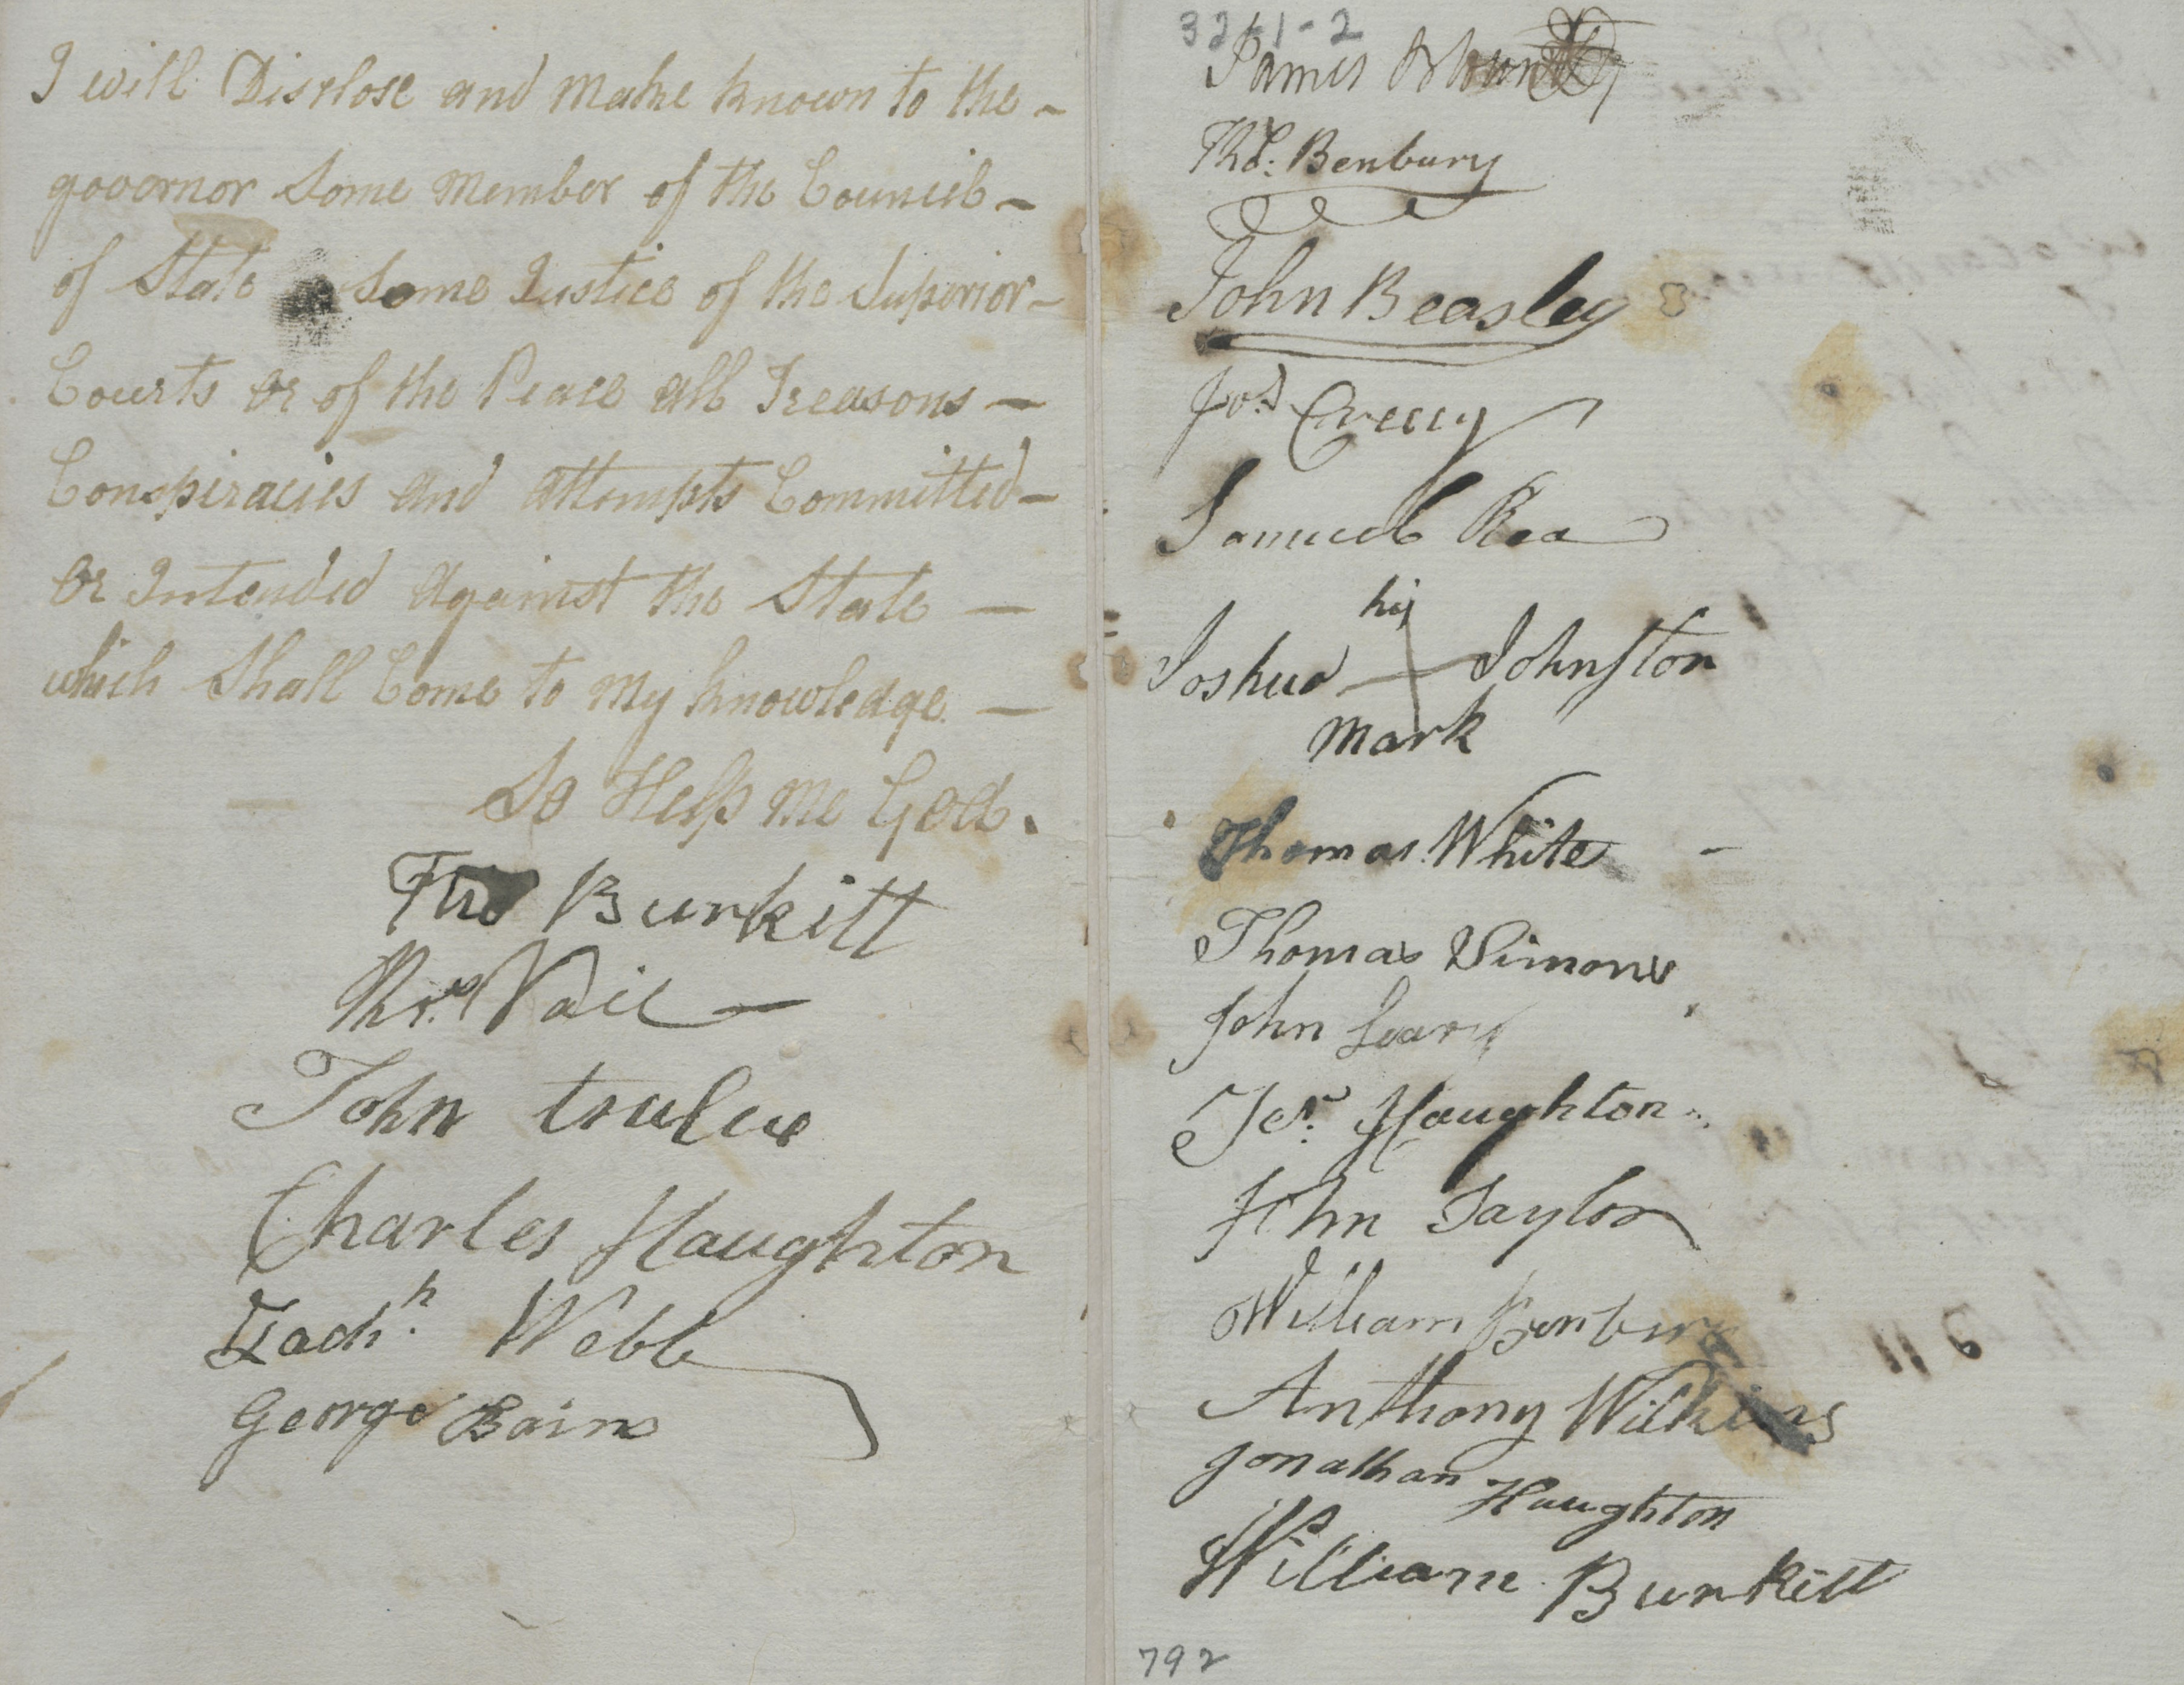 List of People Swearing the Oath of Allegiance in Chowan County, 2 May 1778, page 2